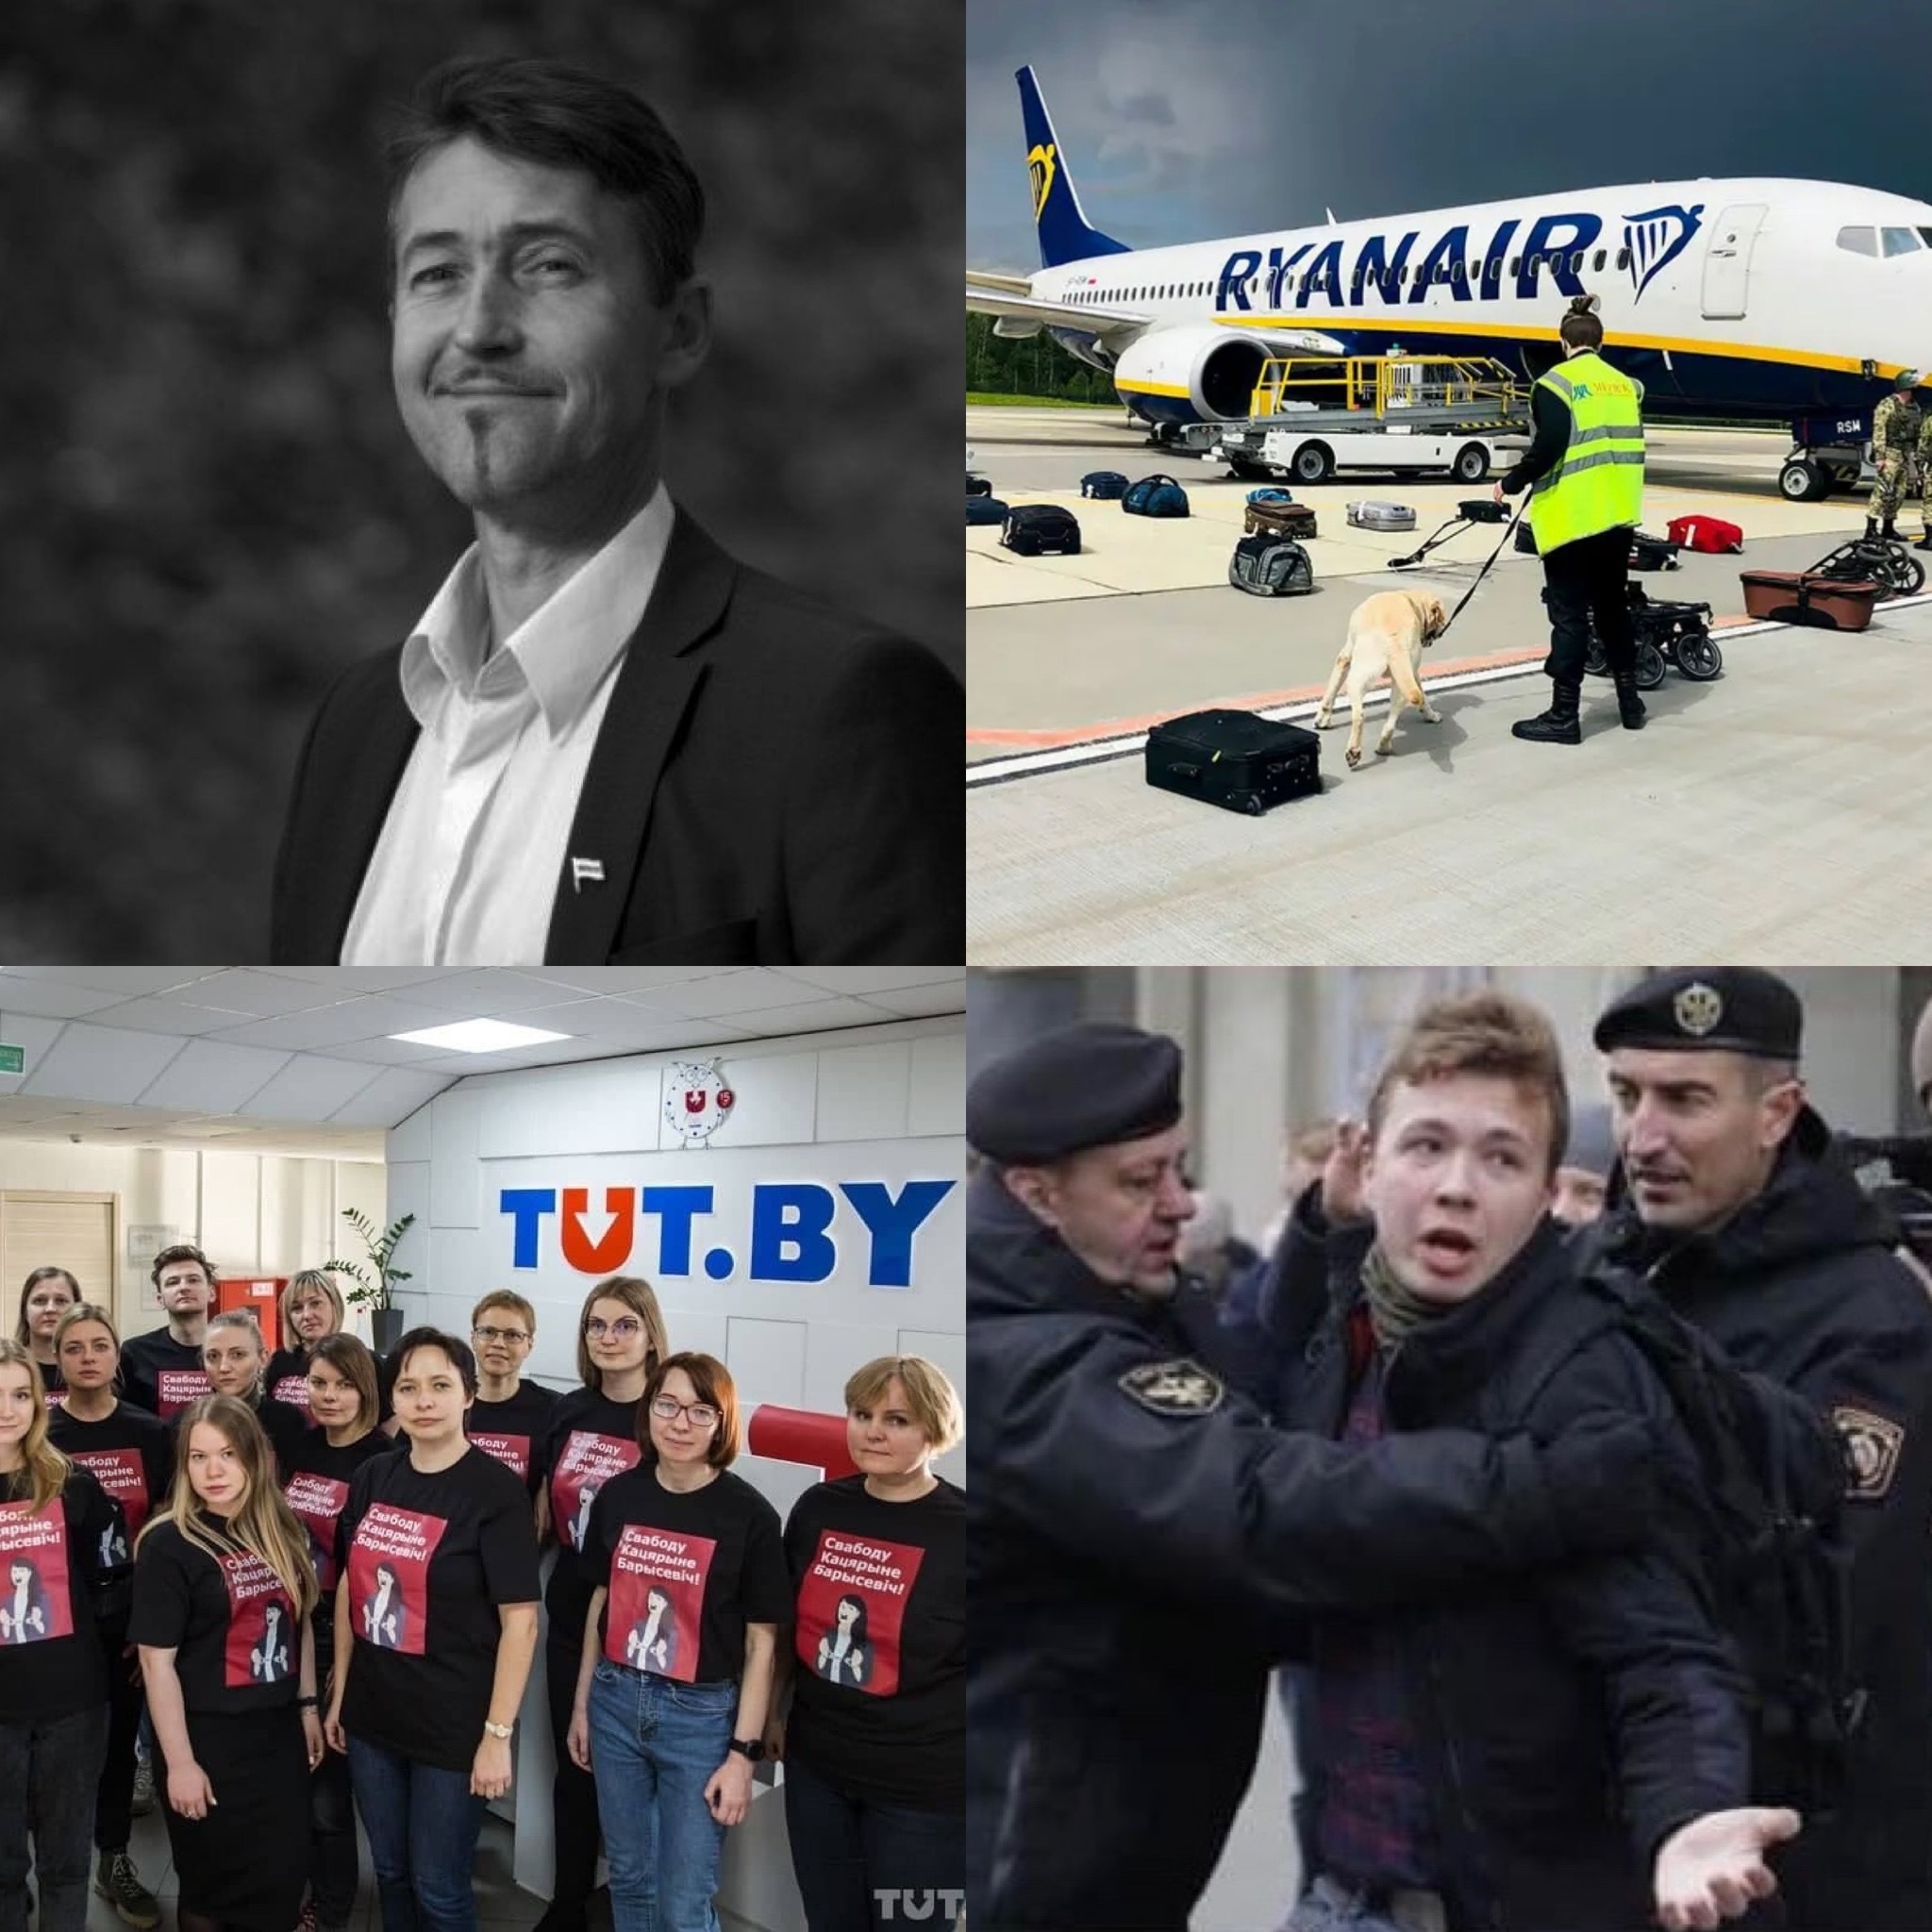 This week: Belarus regime is hijacking planes, cracking down on journalists, allowing police to use firearms on demonstrators &amp; more